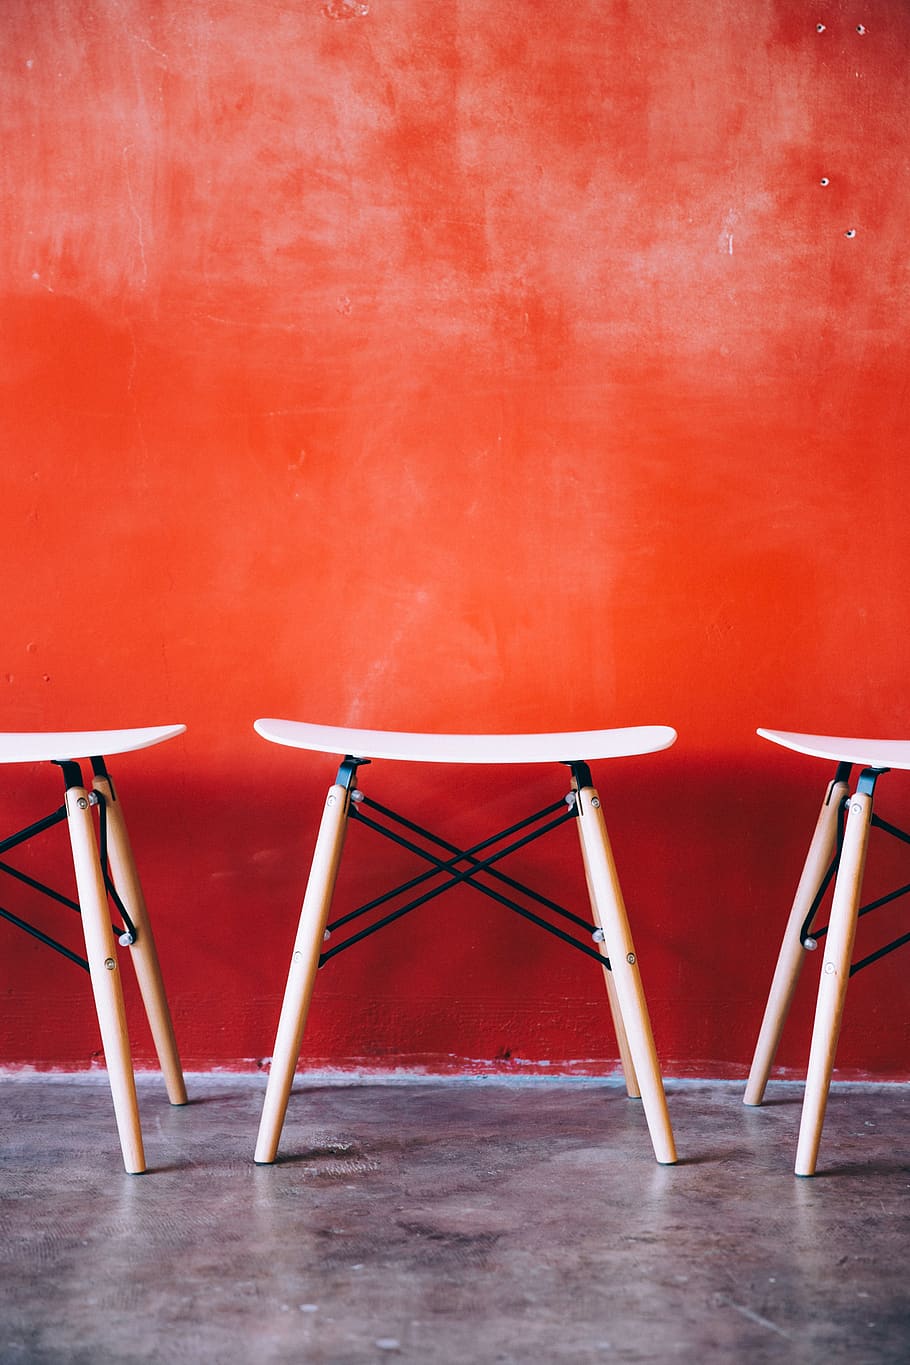 modern, stools, cafe, chairs, red wall, texture, seats, indoors, restaurant, minimalist